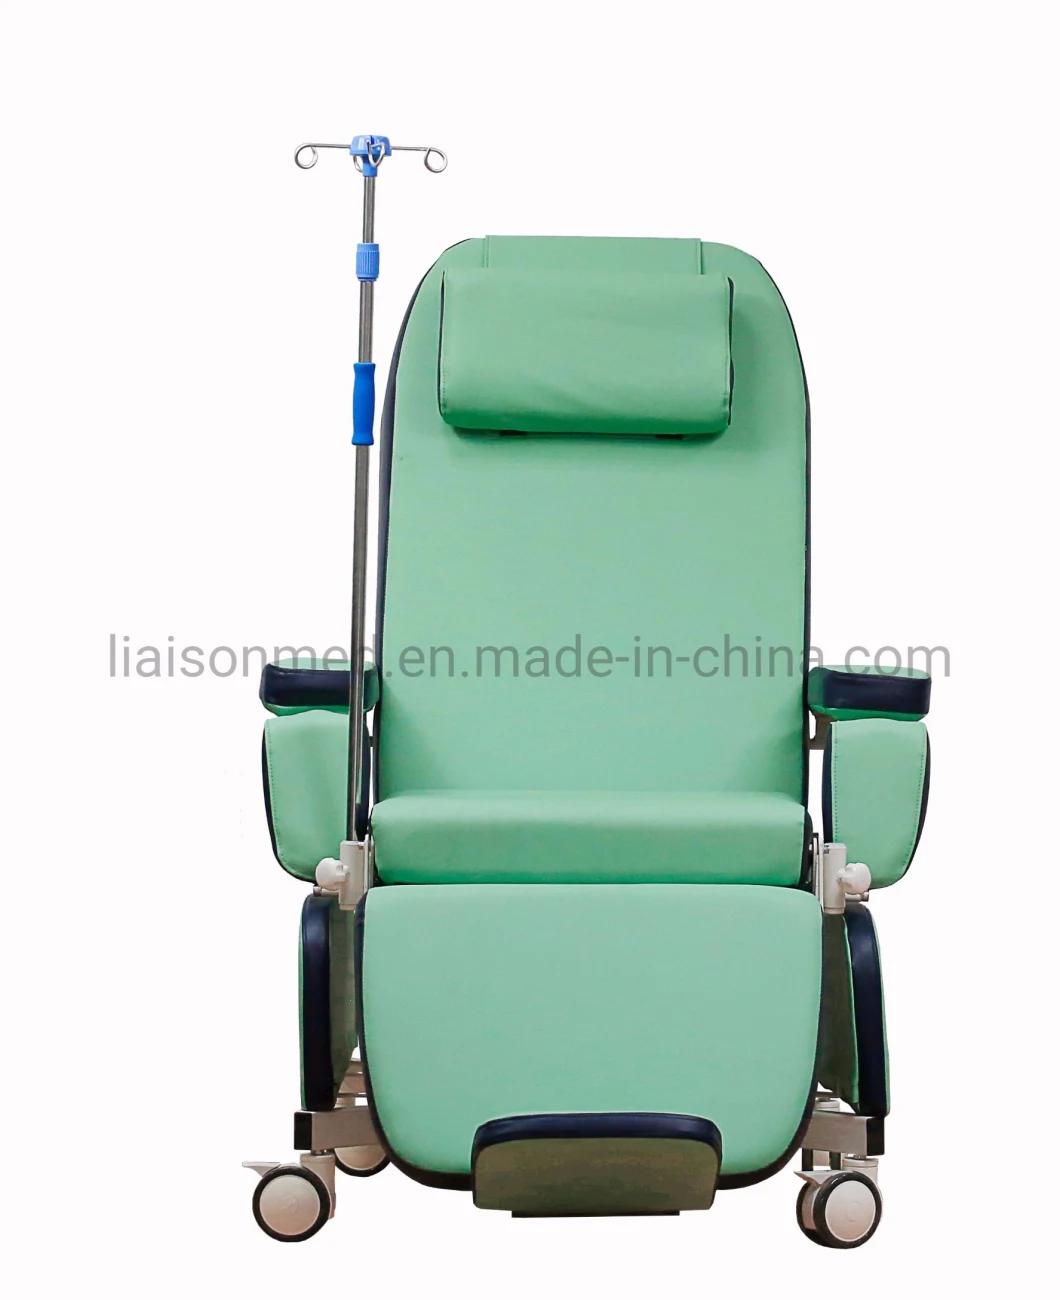 Mn-Bdc002 Medical Electric Blood Donation Chair Dialysis Seating Patient Chair